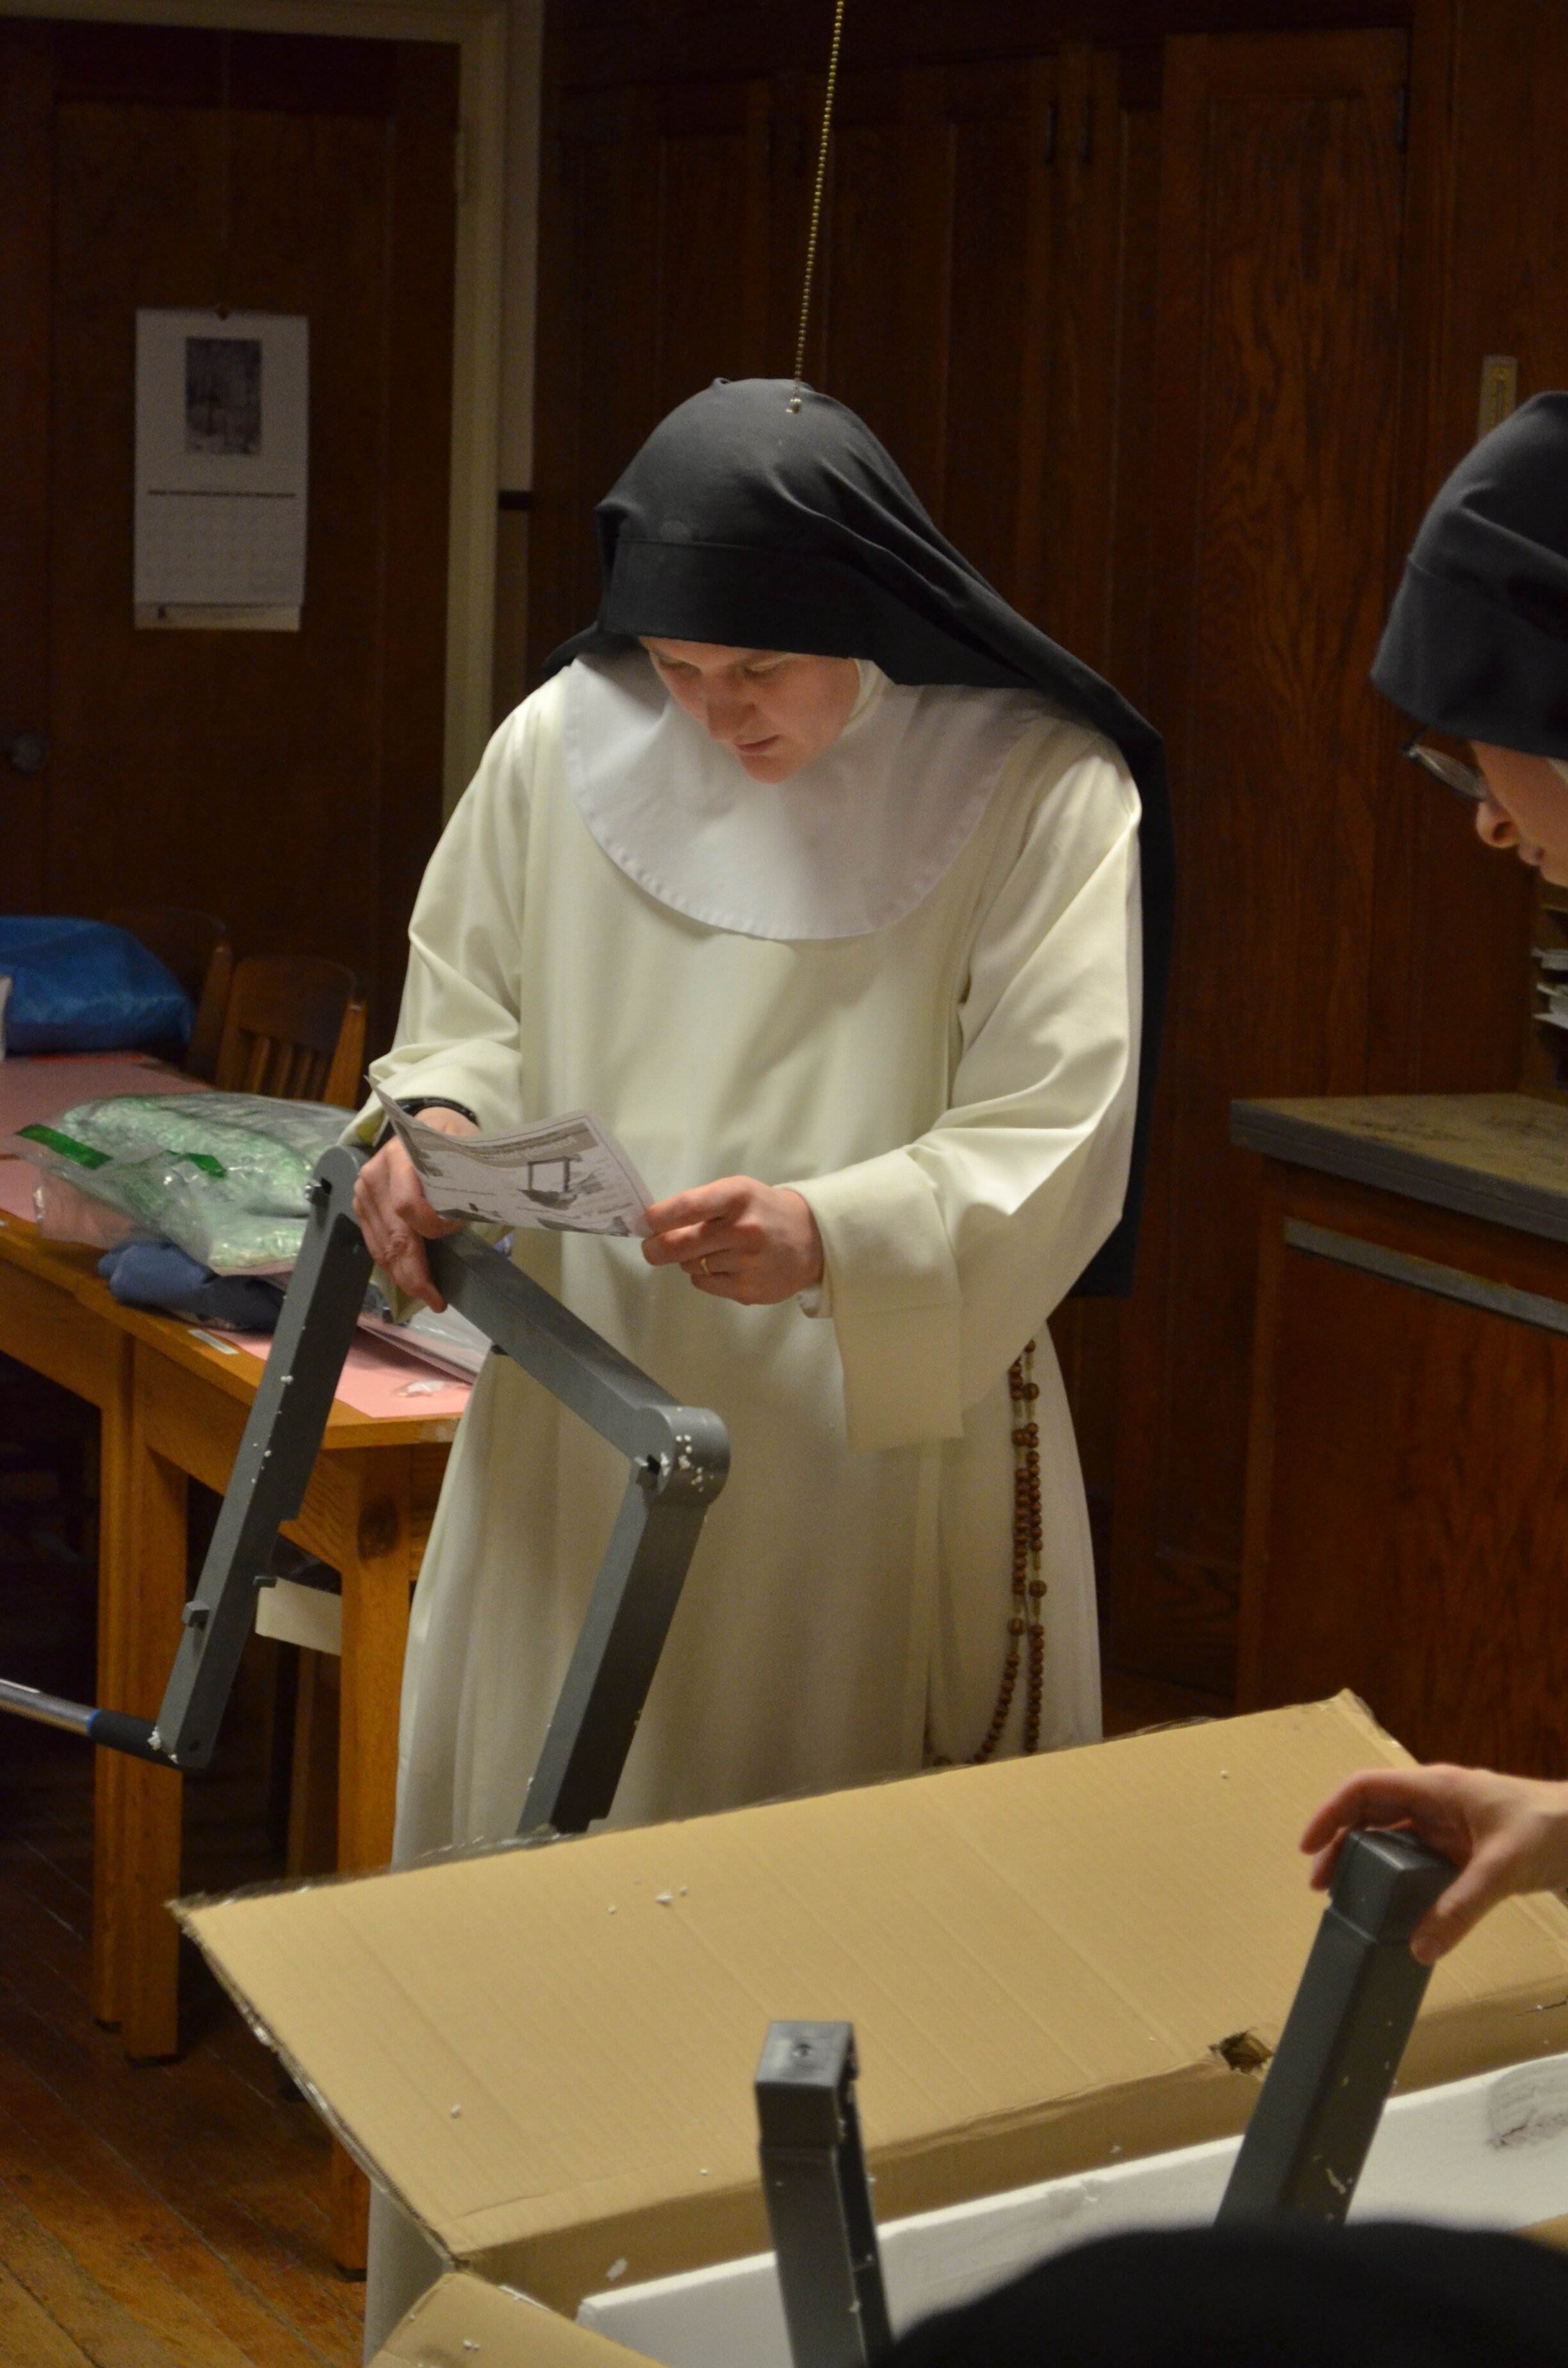 Sr. Mary Magdalene studies the instructions for the cleaning cart